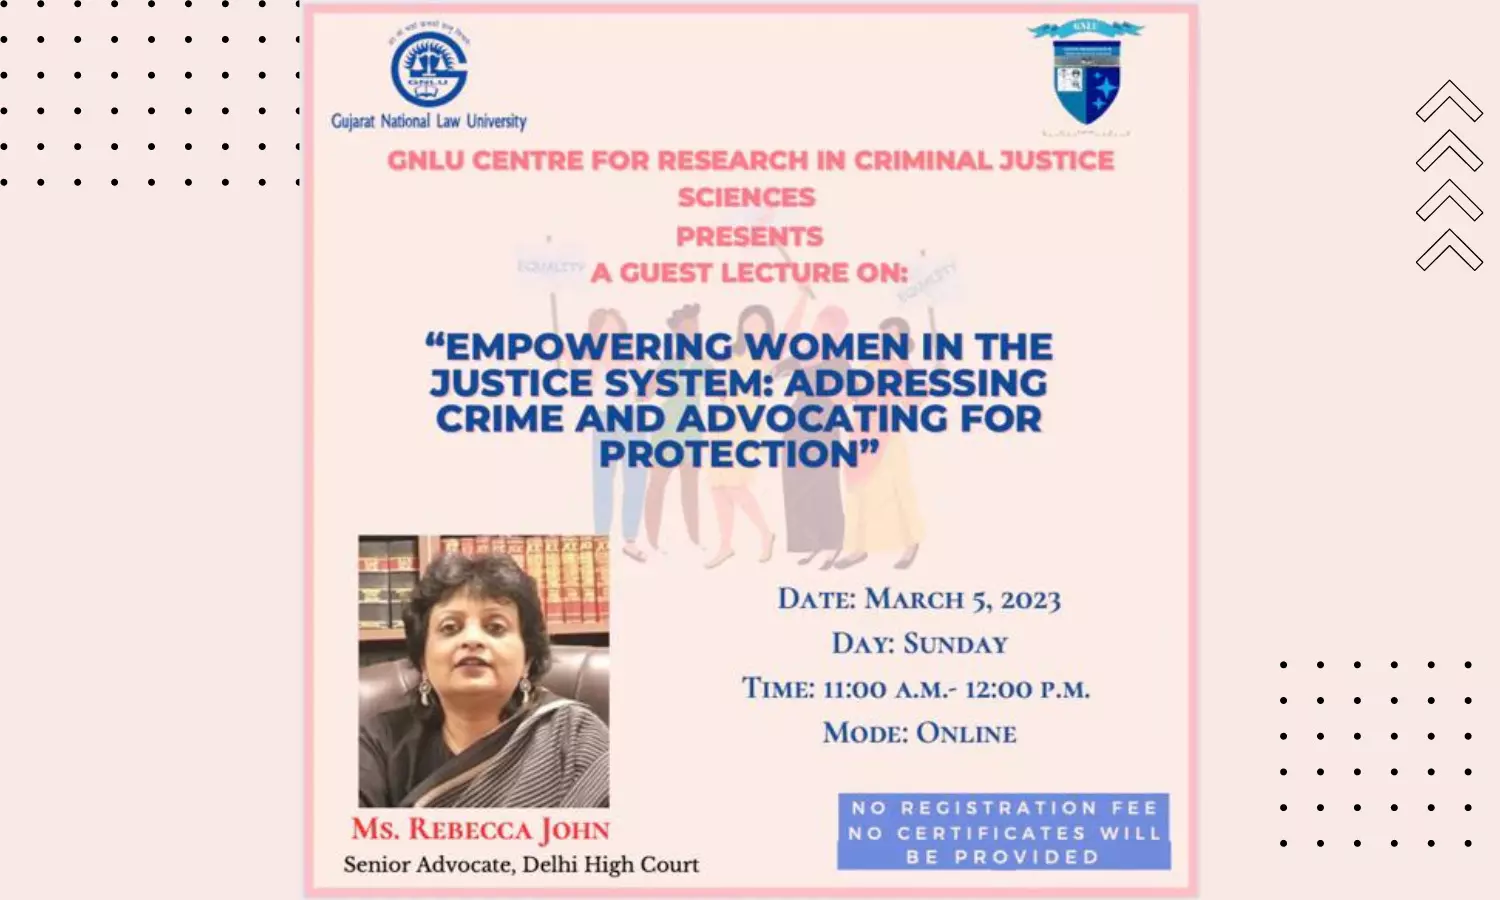 Guest Lecture on Empowering Women in the Justice System 2023: Addressing Crime and Advocating for Protection | Gujarat National Law University | 05th March 2023